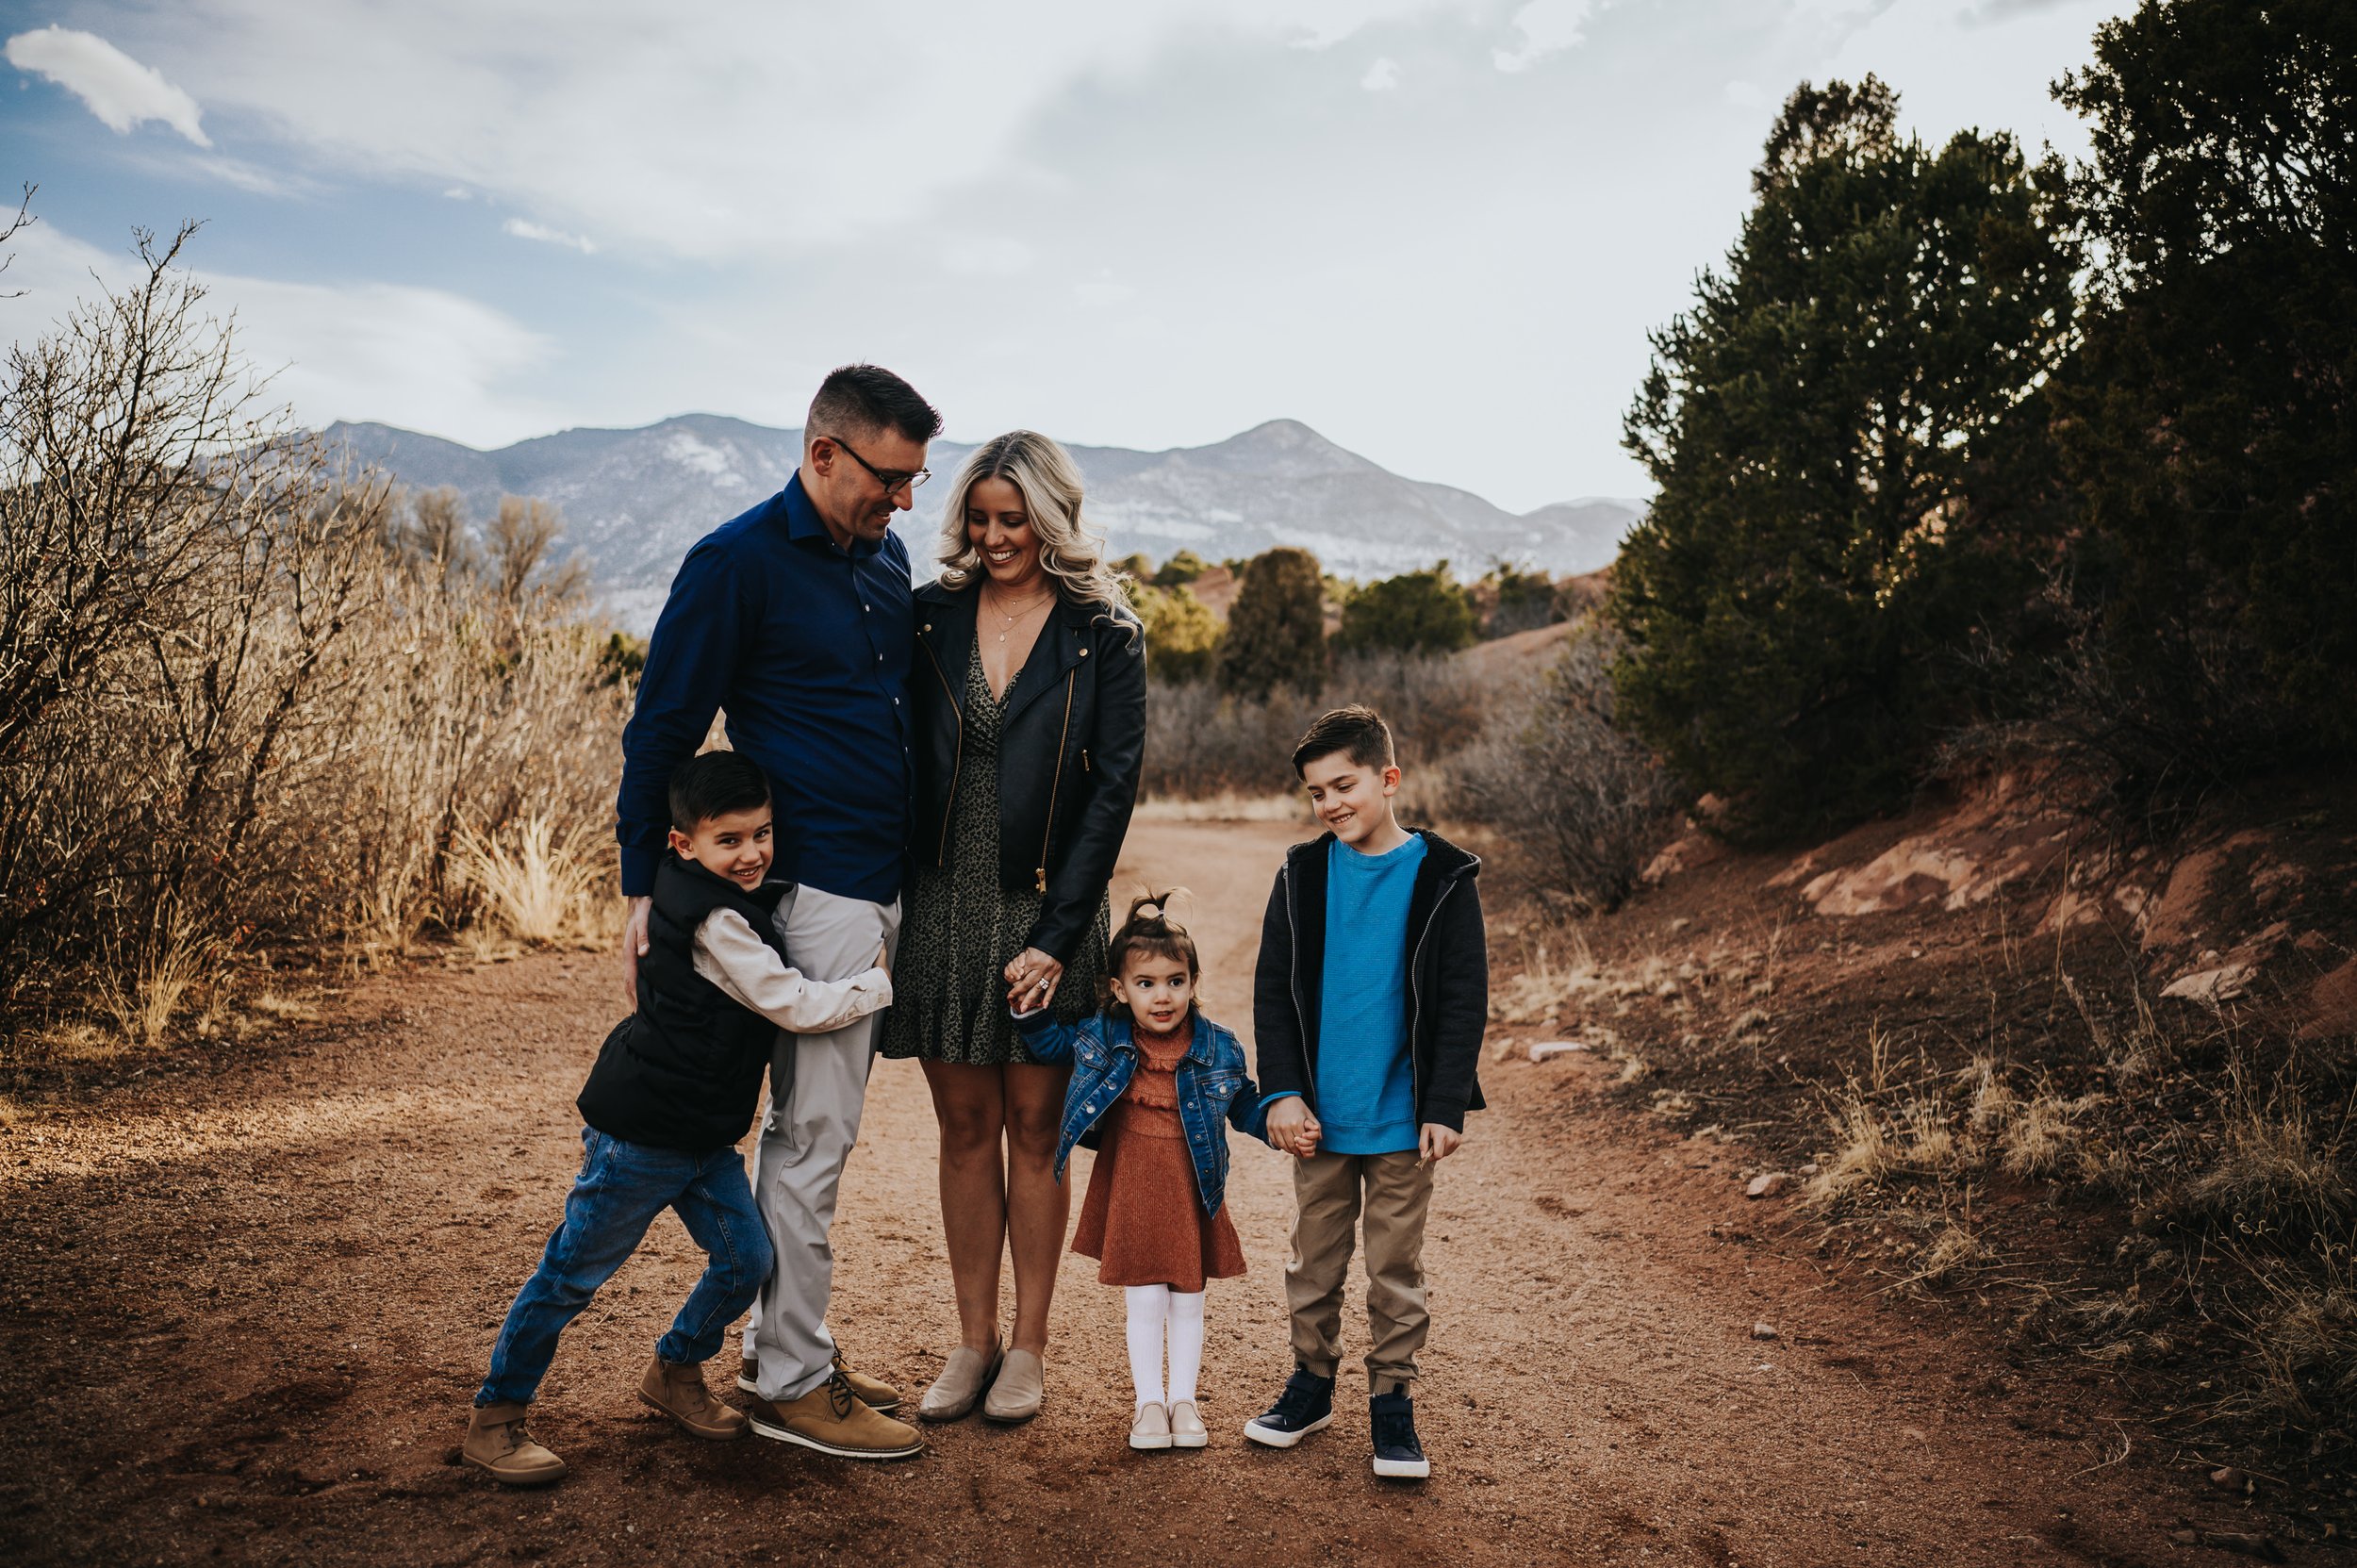 AnneMarie Jameson Family Session Colorado Springs Colorado Photographer Garden of the Gods Sunset Mountain View Husband Wife Sons Daughter Wild Prairie Photography-1-2022.jpg